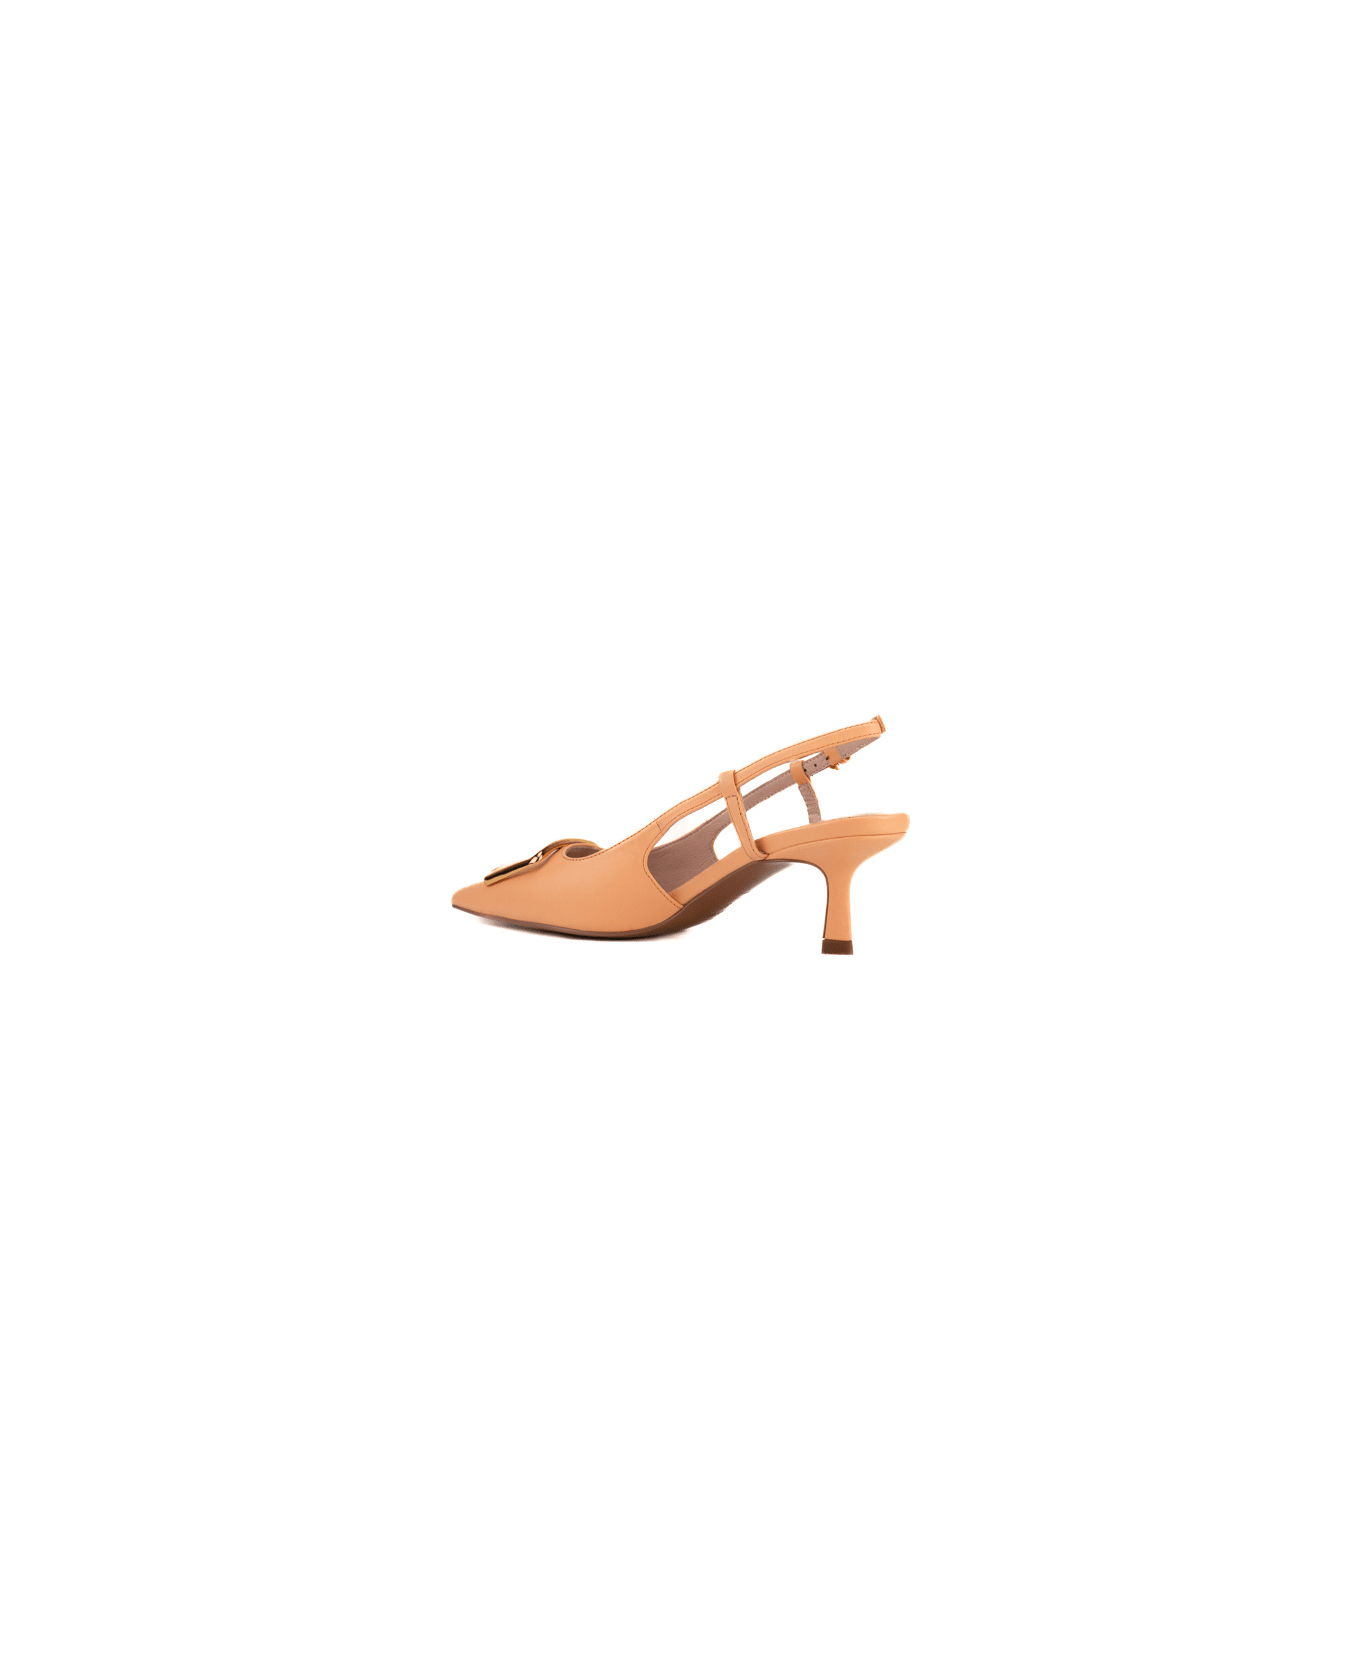 Coccinelle Leather Pumps With Stiletto Heel - Sunrise